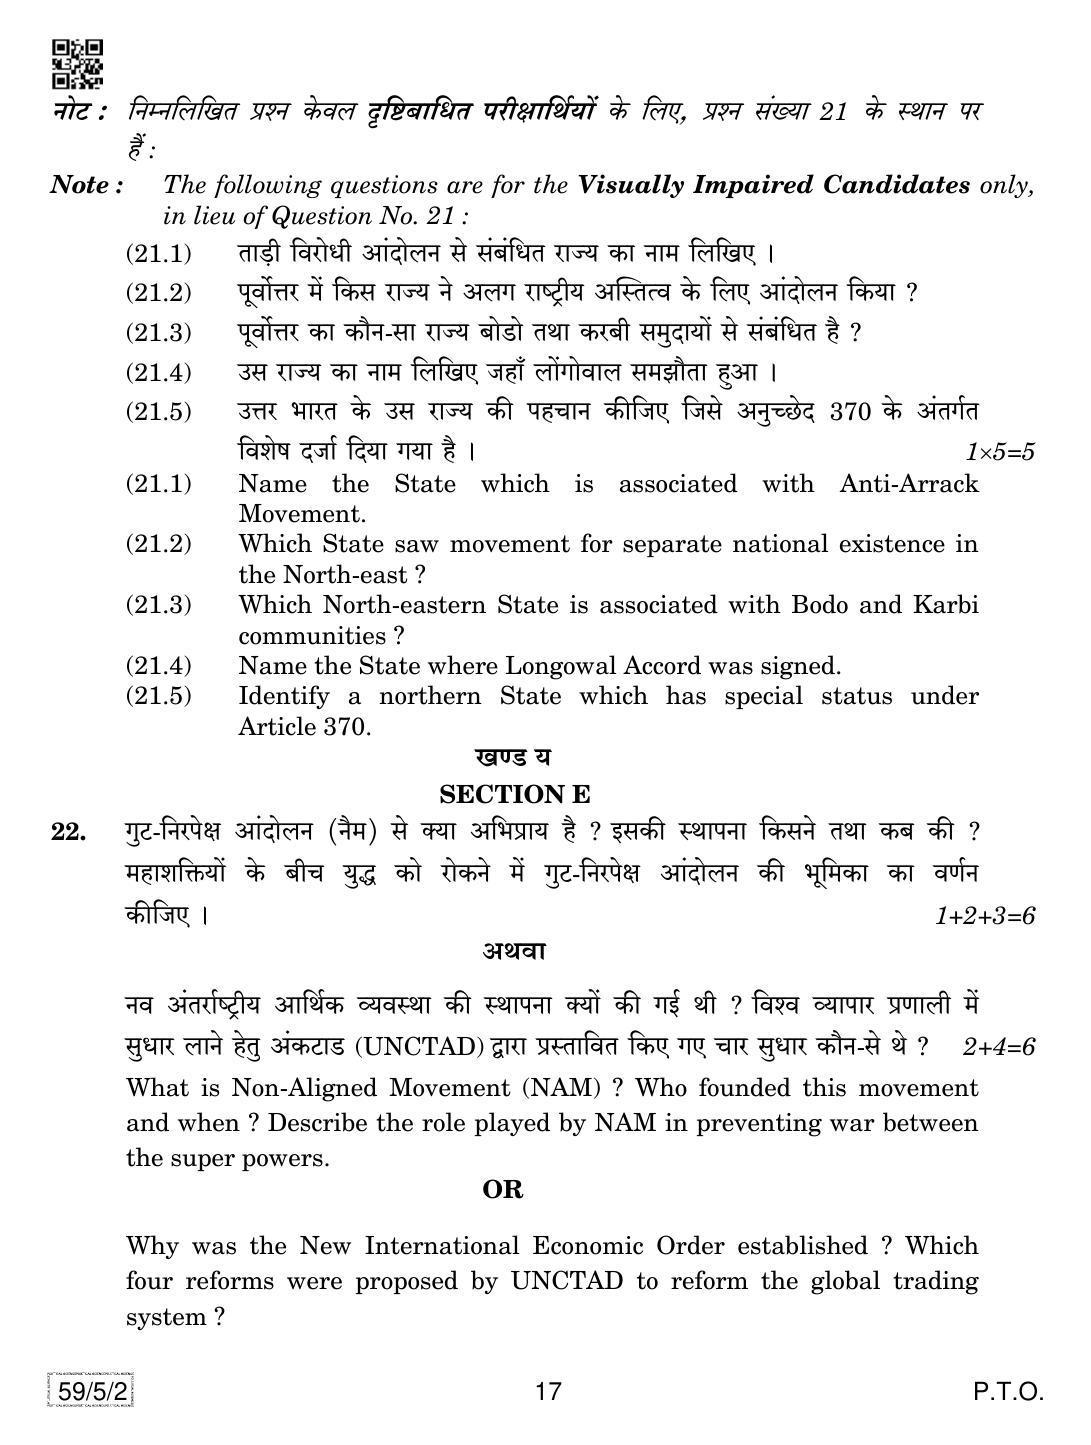 CBSE Class 12 59-5-2 Political Science 2019 Question Paper - Page 17